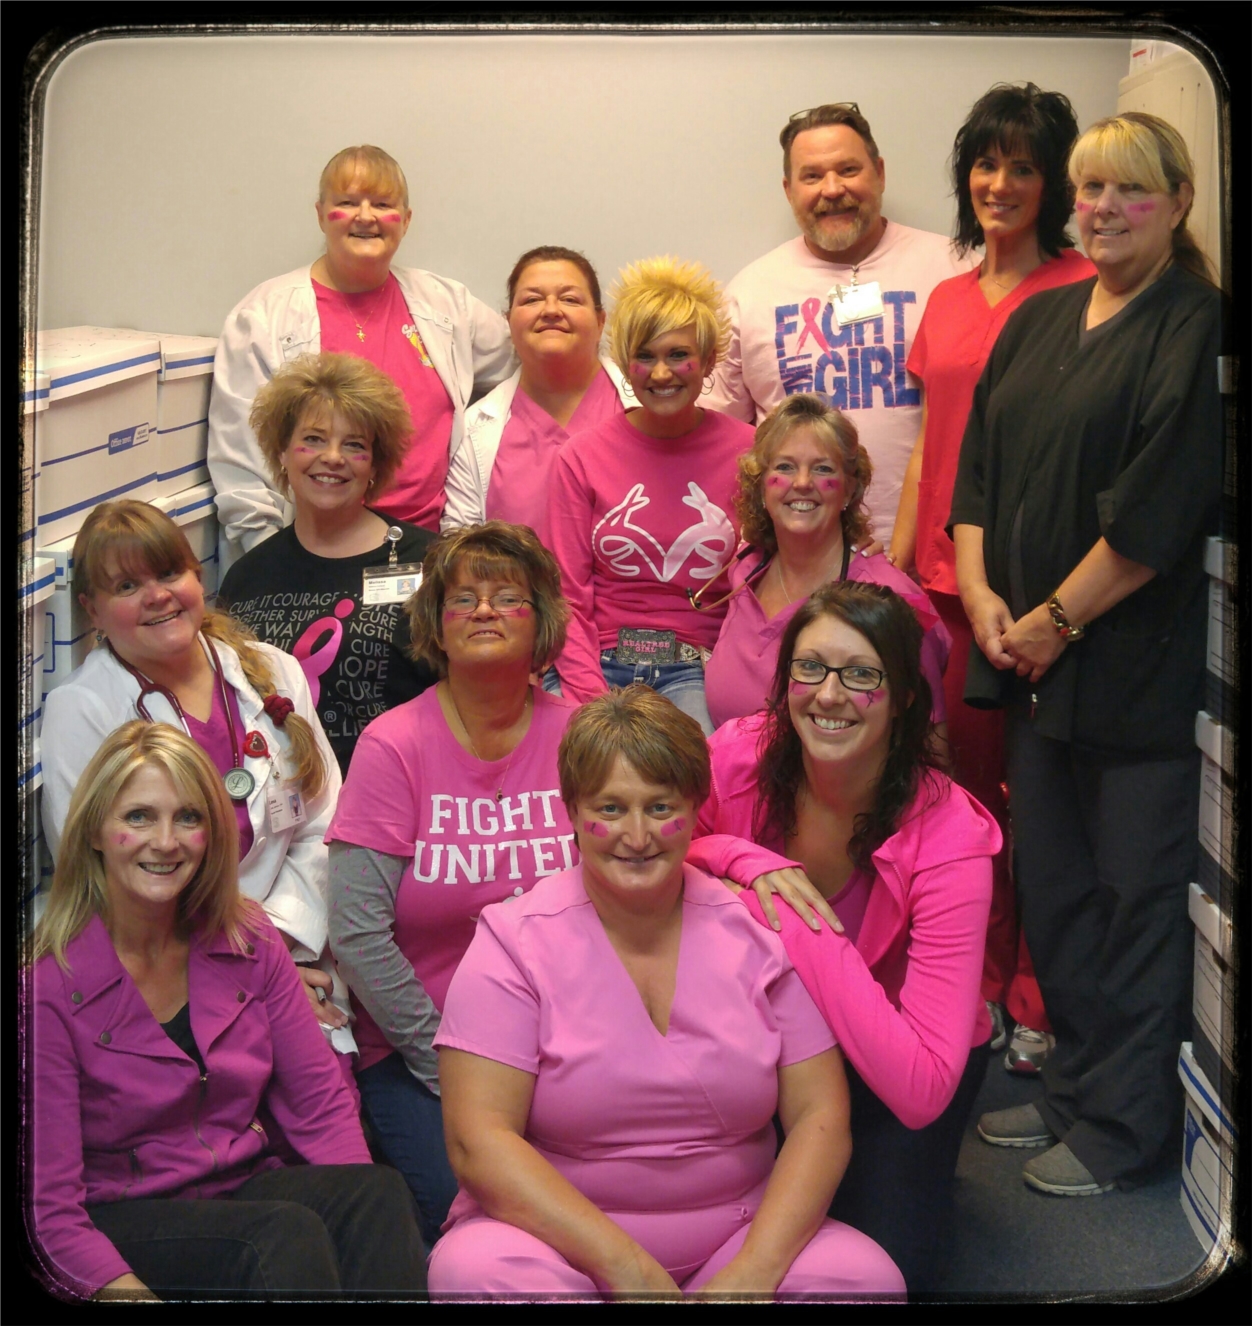 Our employees supporting Pink Ribbon Day!